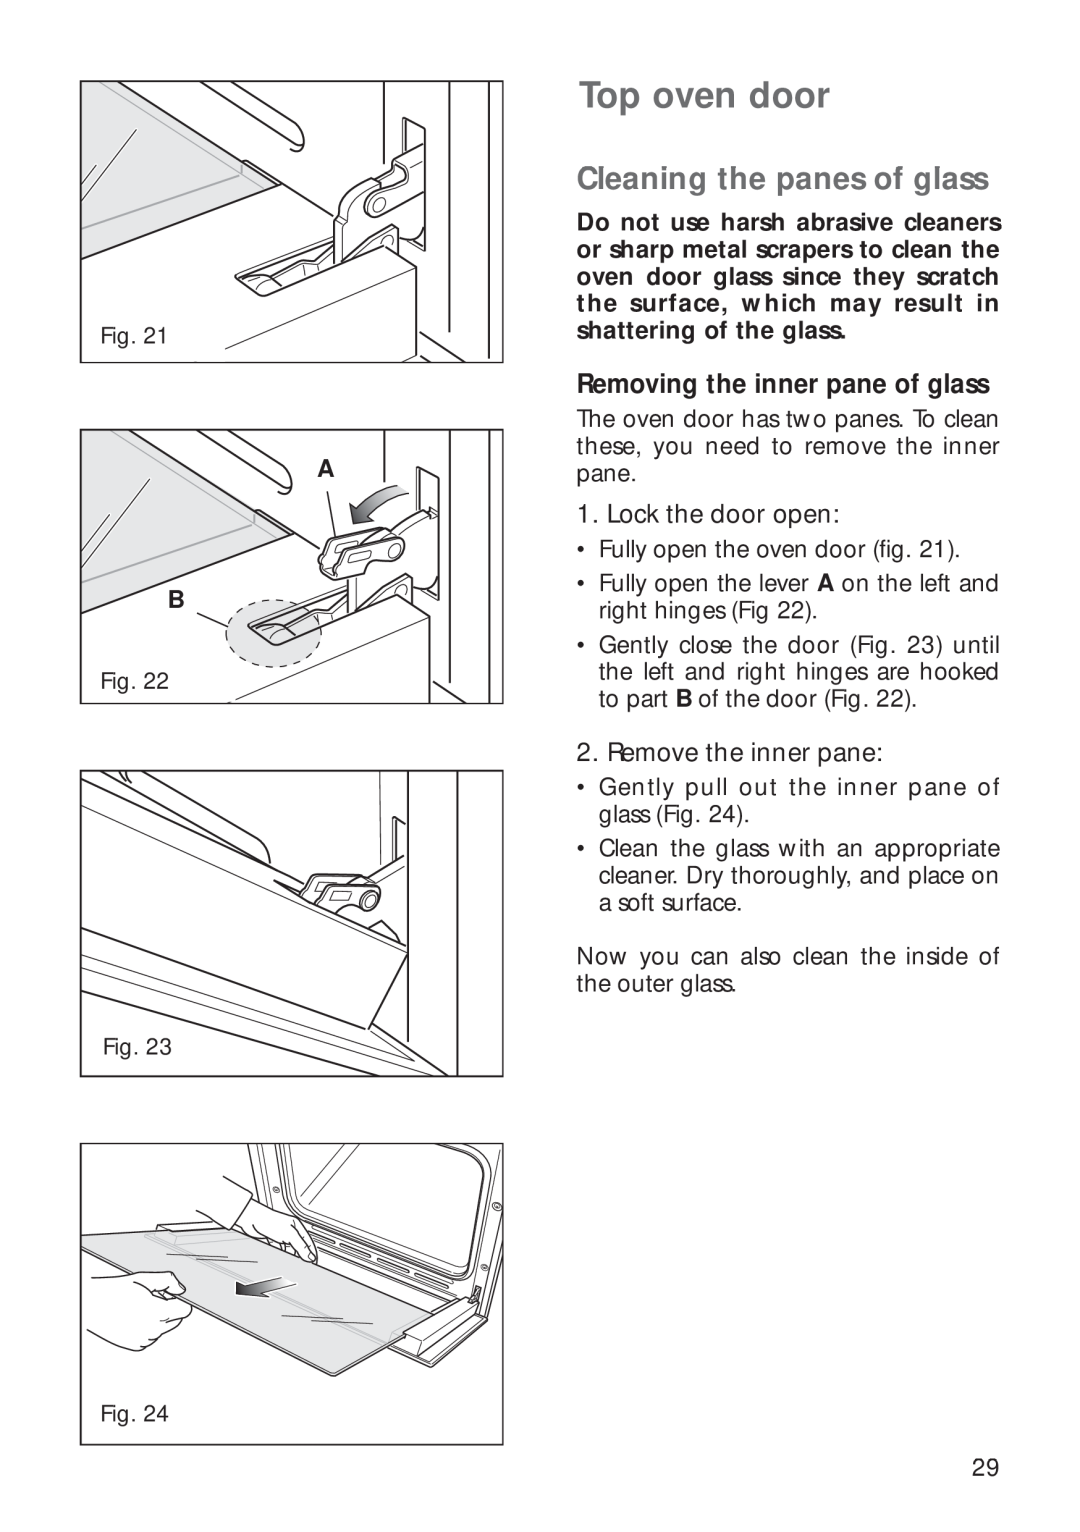 CDA RV 700 installation instructions Cleaning the panes of glass, Removing the inner pane of glass, Top oven door 